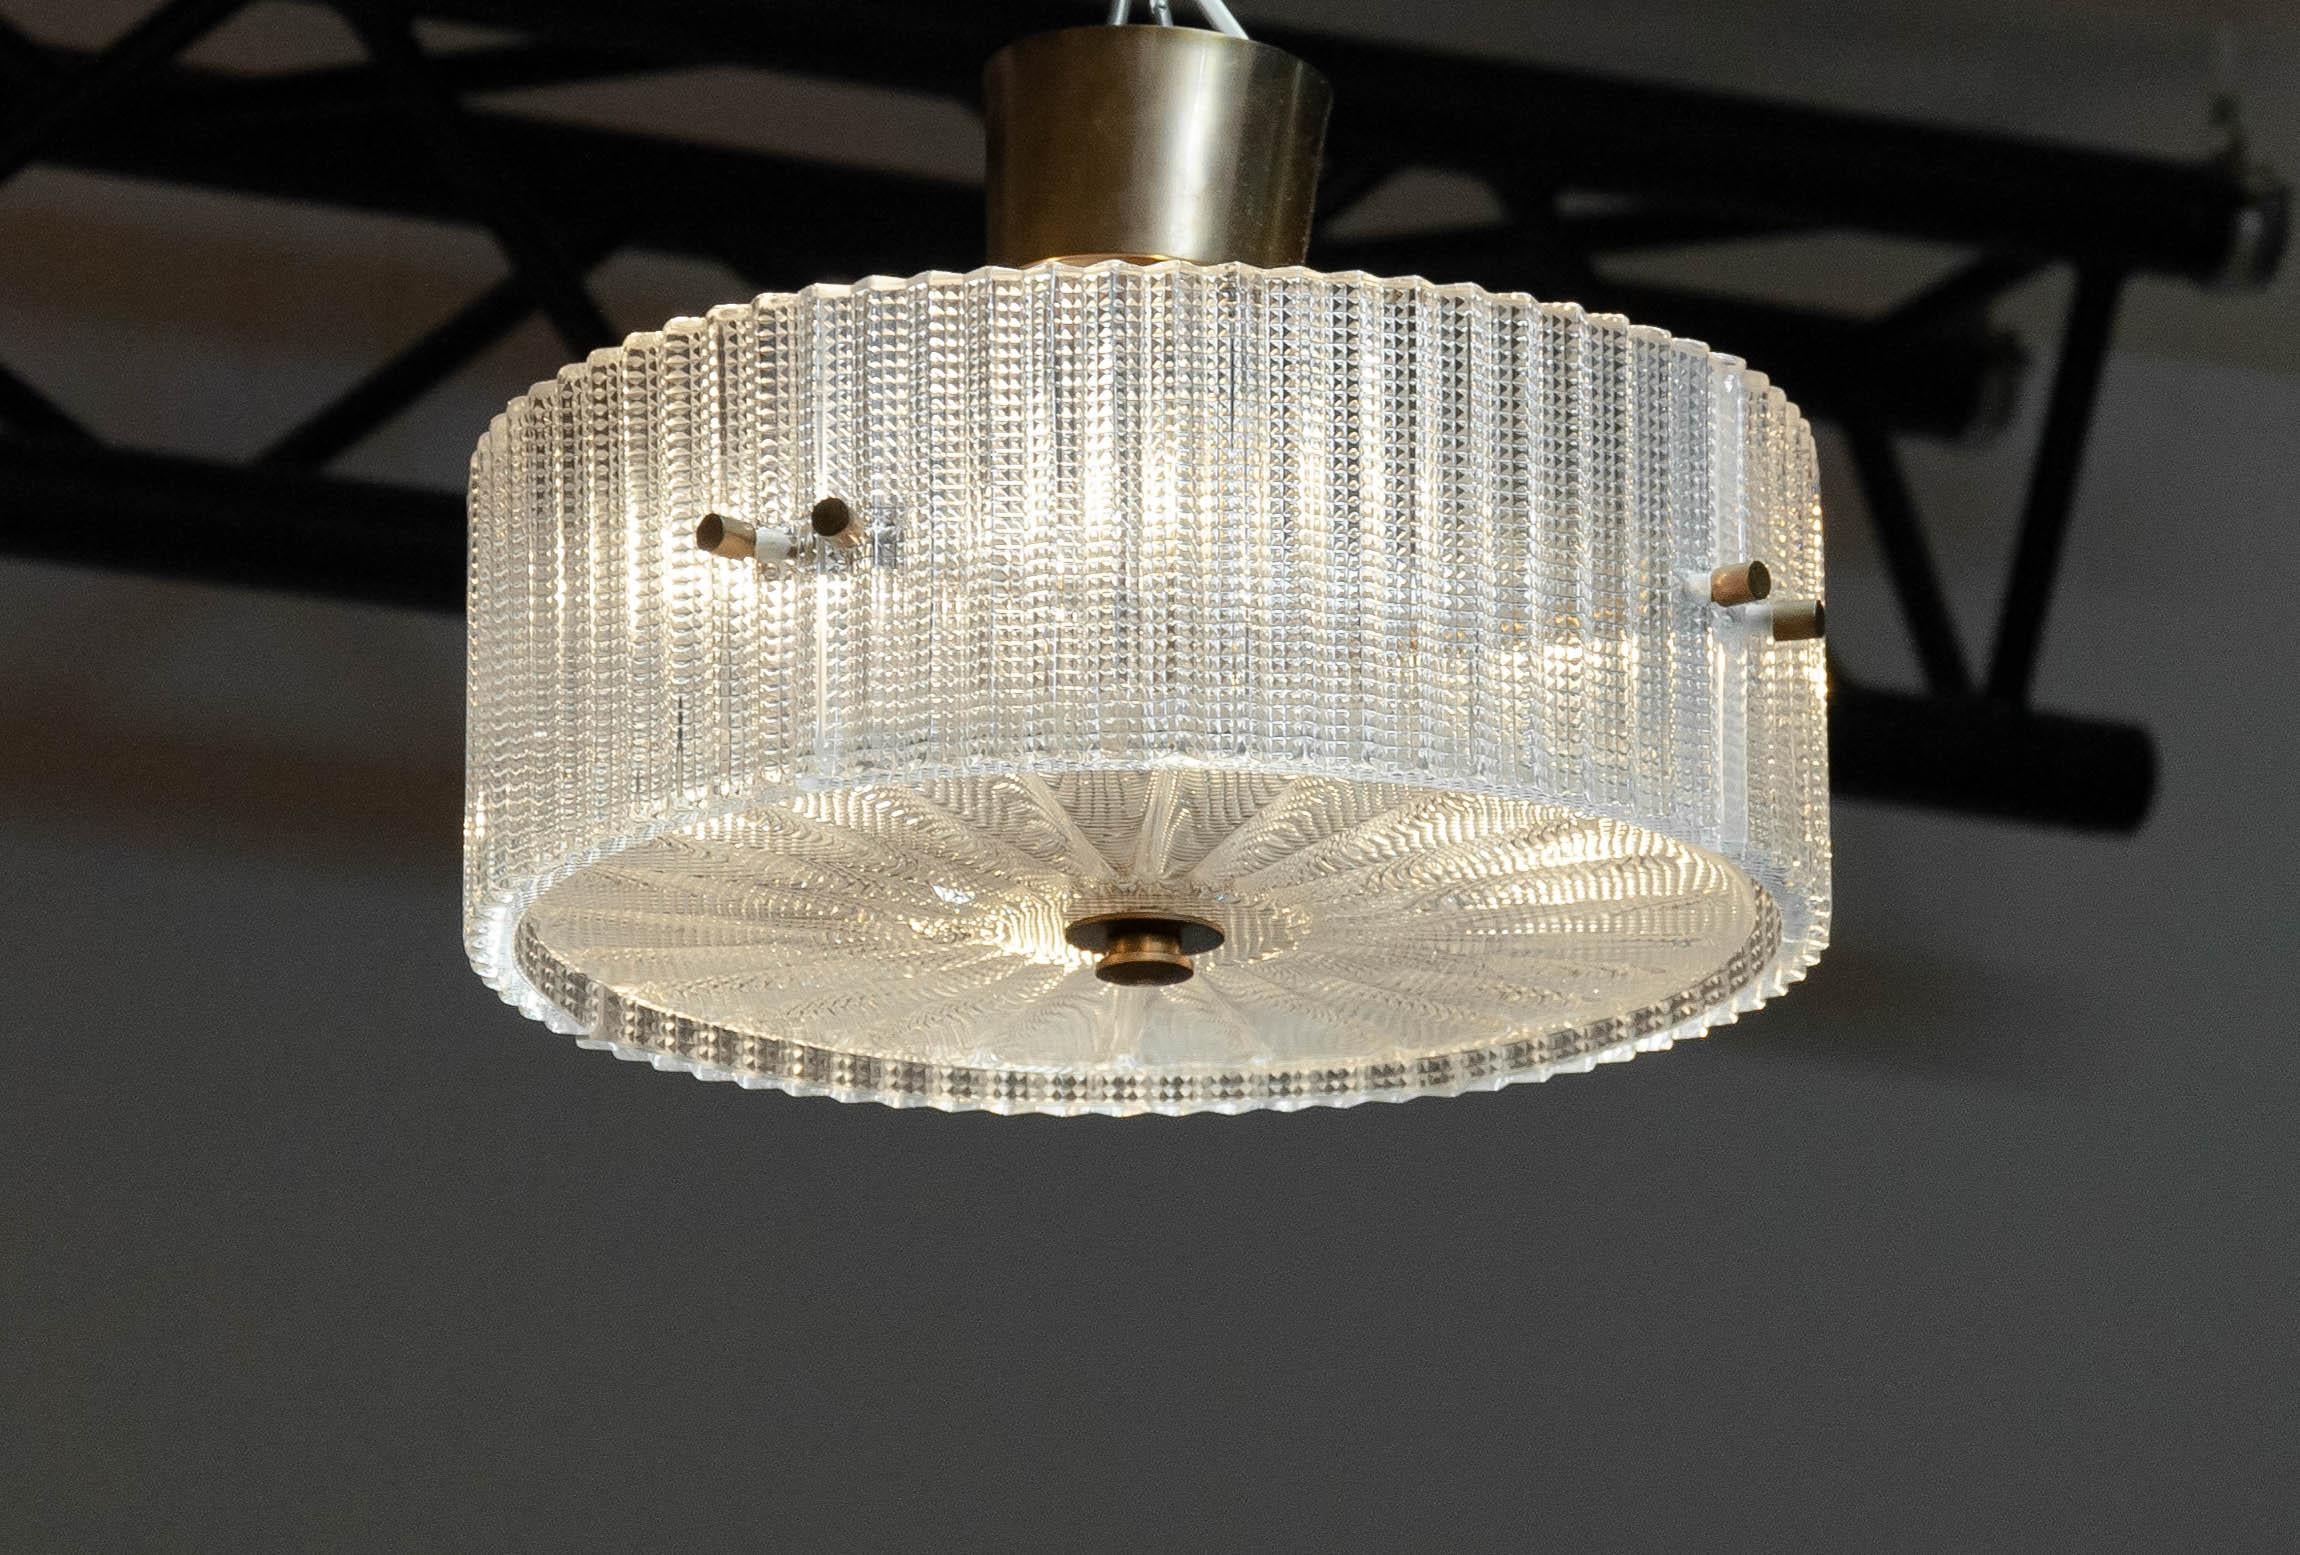 Mid century ceiling lamp / flush mount designed by Carl Fagerlund for Orrefors in Sweden.
The fixture is made of brass and supports four E28 screw fittings. 
All glass parts are in excellent and clean condition. The fixture as well as the wiring and